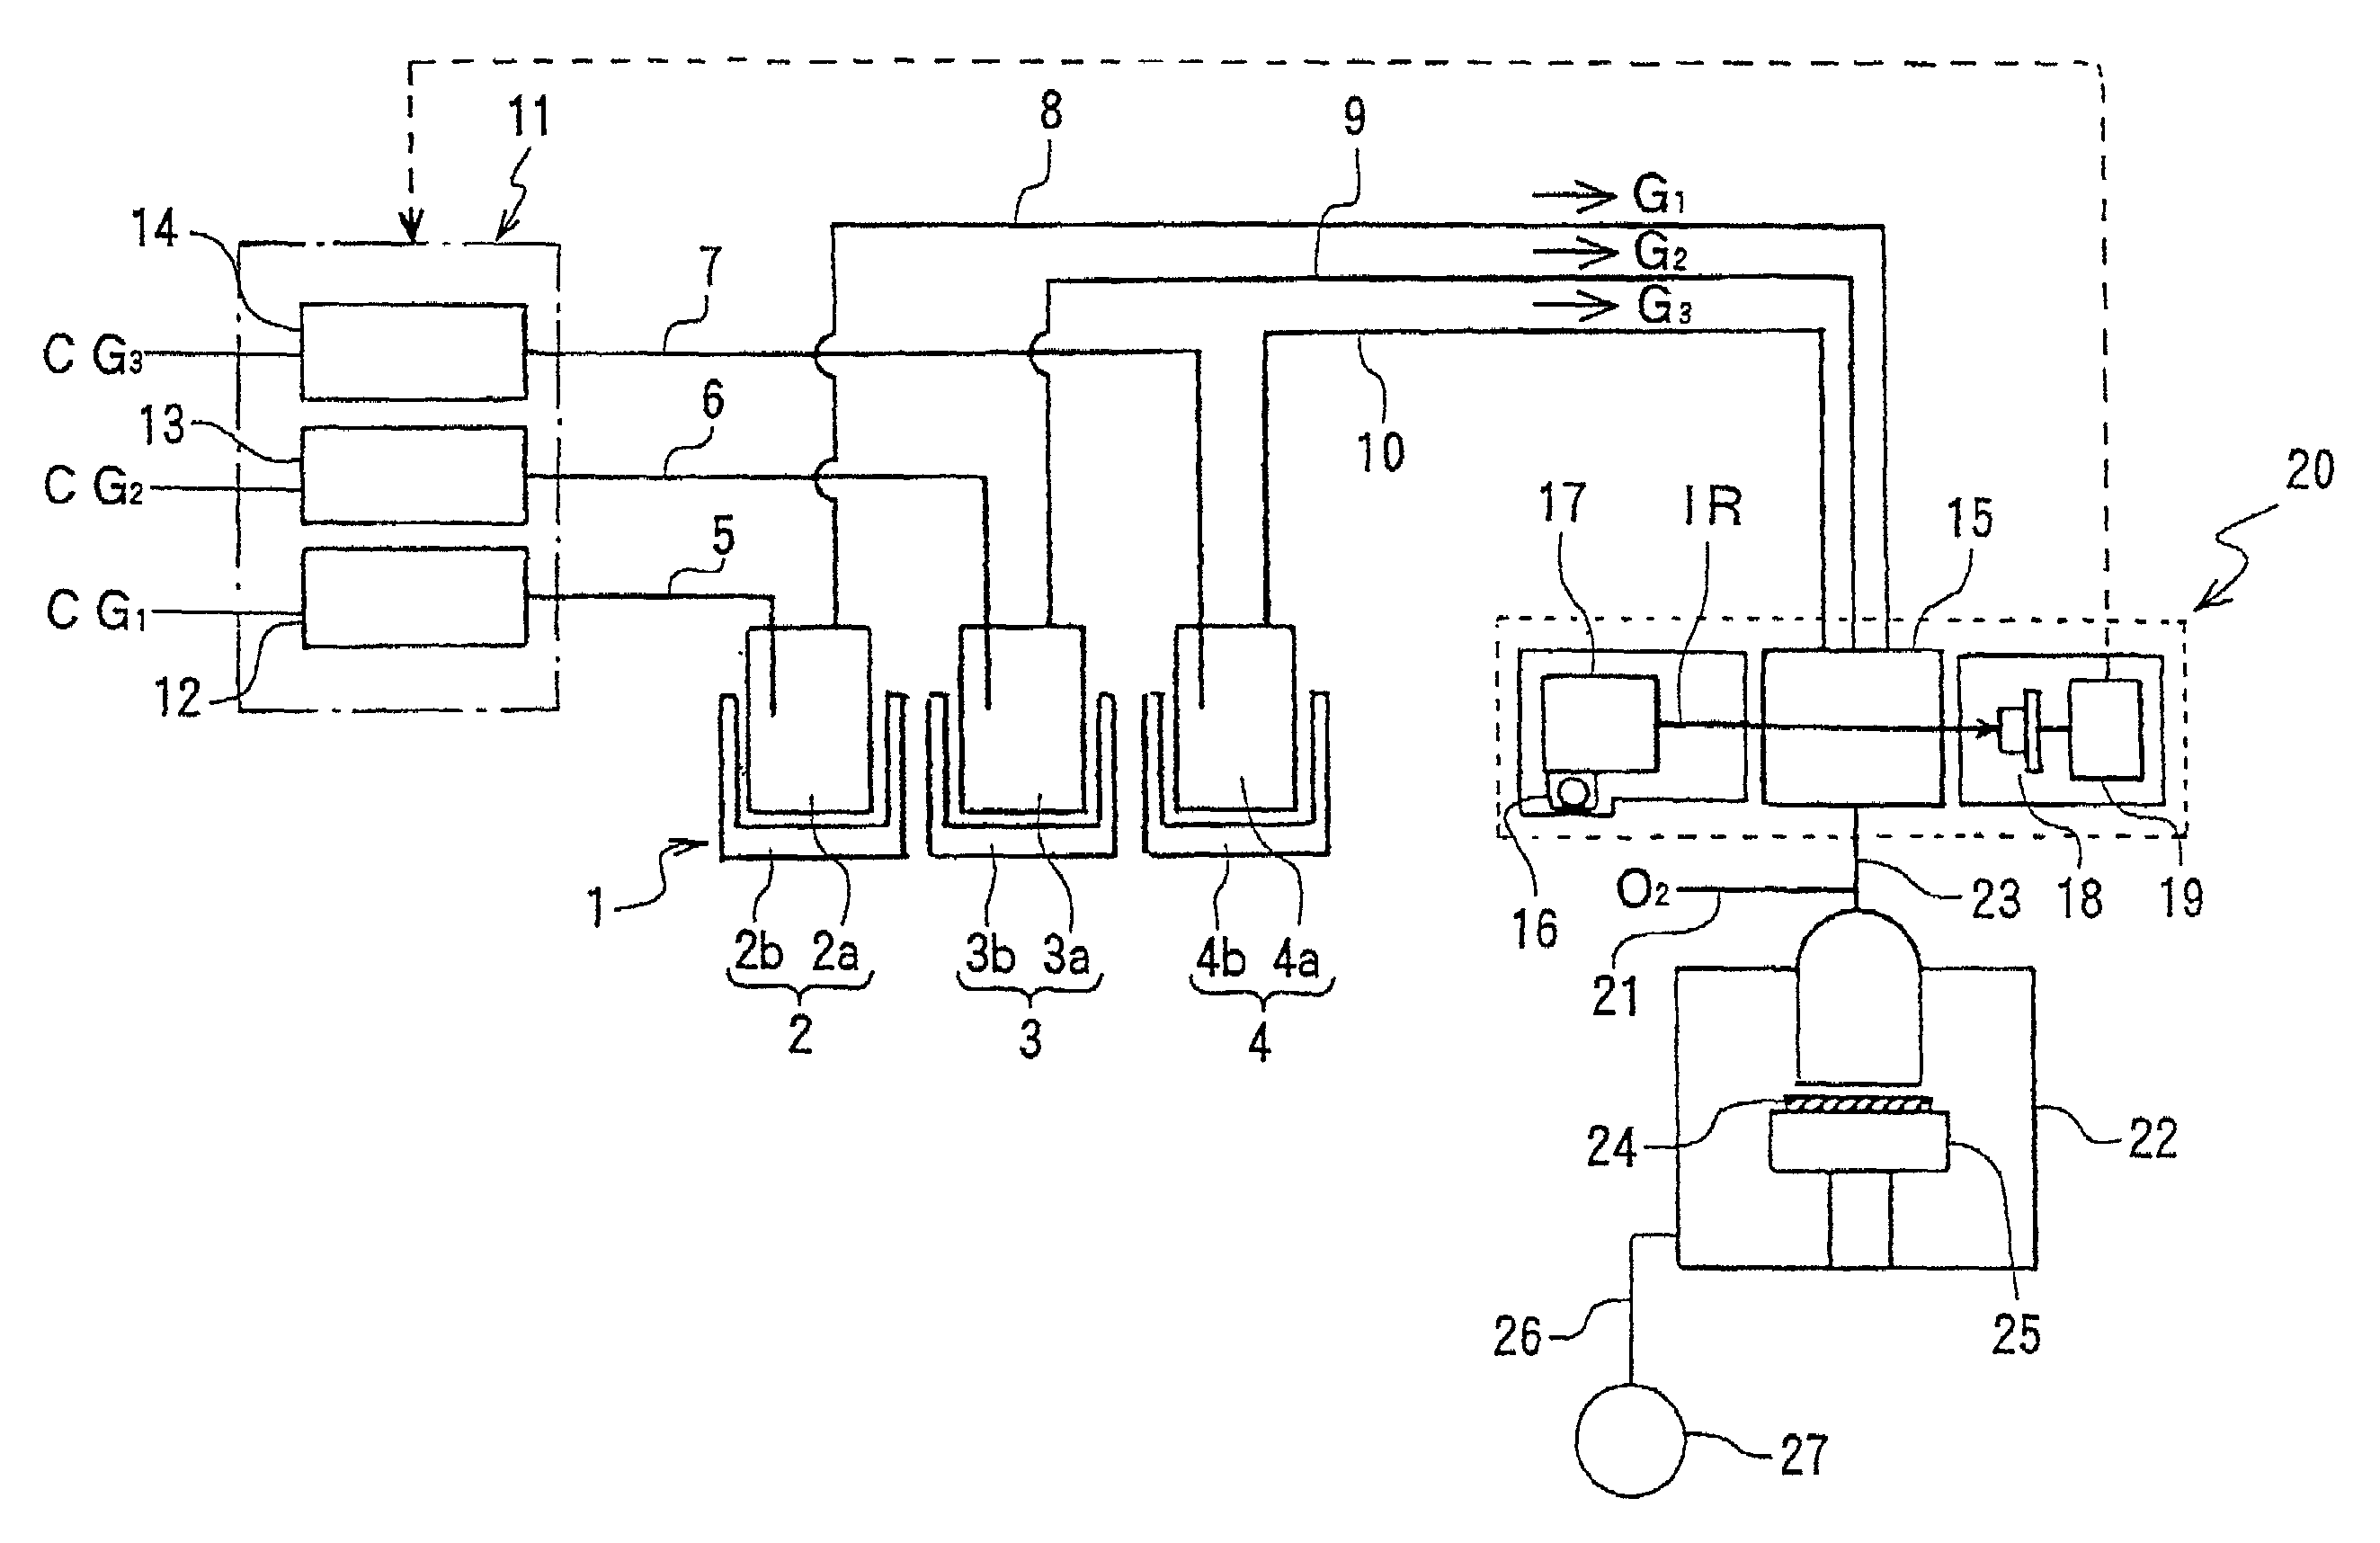 Thin film deposition device using an FTIR gas analyzer for mixed gas supply